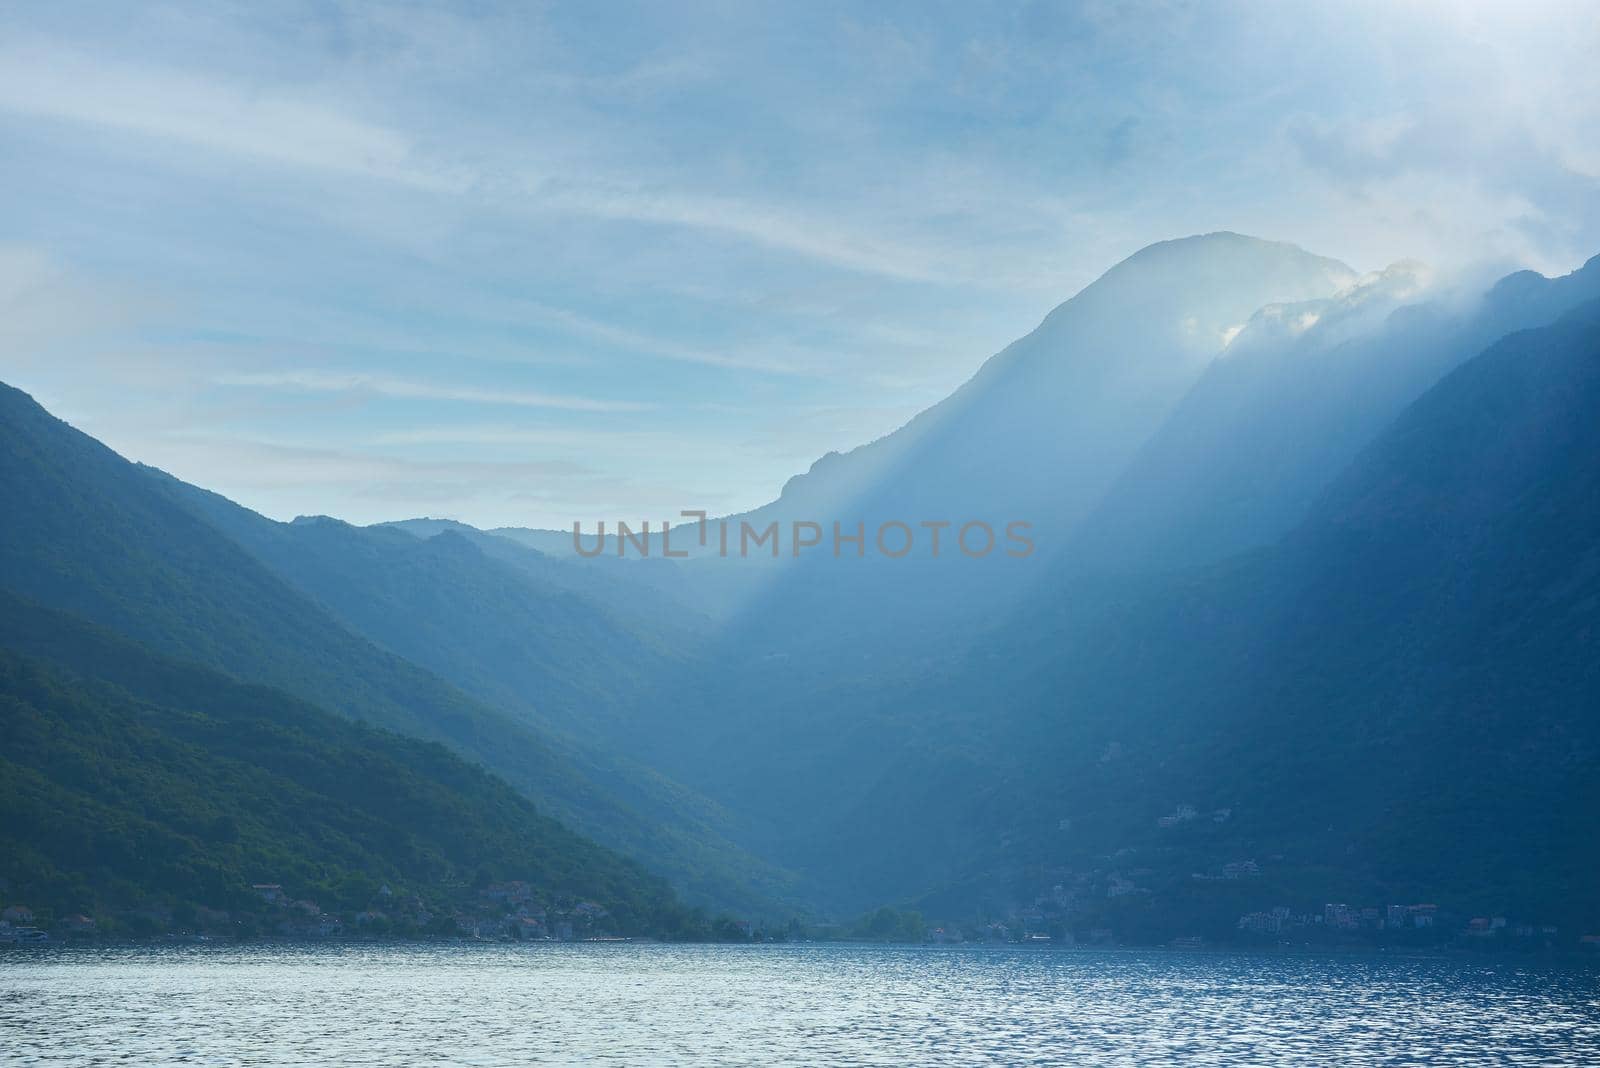 Landscape with mountains by the sea in the Bay of Kotor, Montenegro.